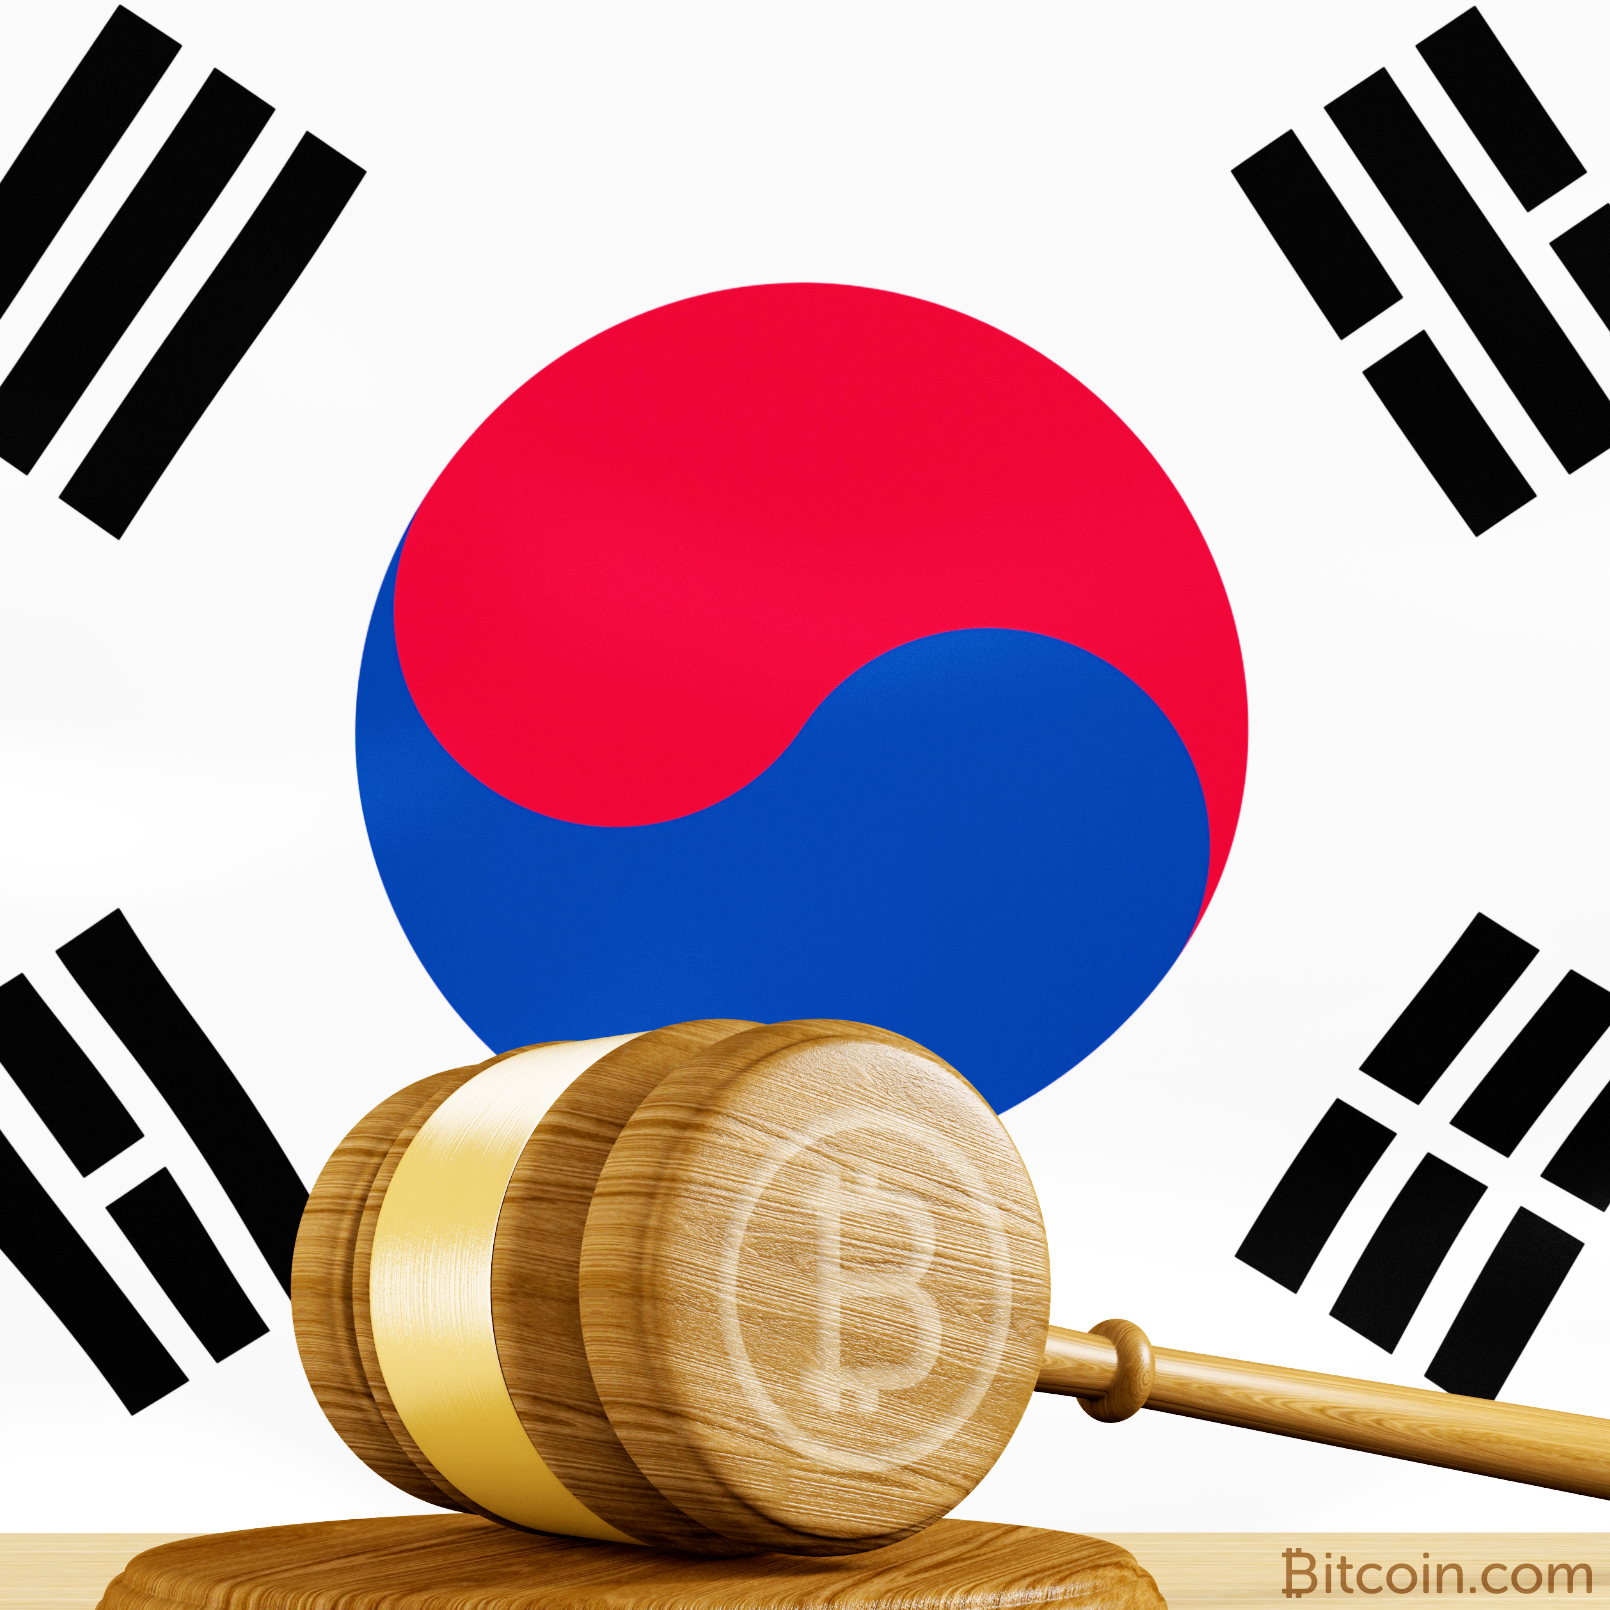 Korean Supreme Court to Judge Whether Crypto Regulations Are Unconstitutional